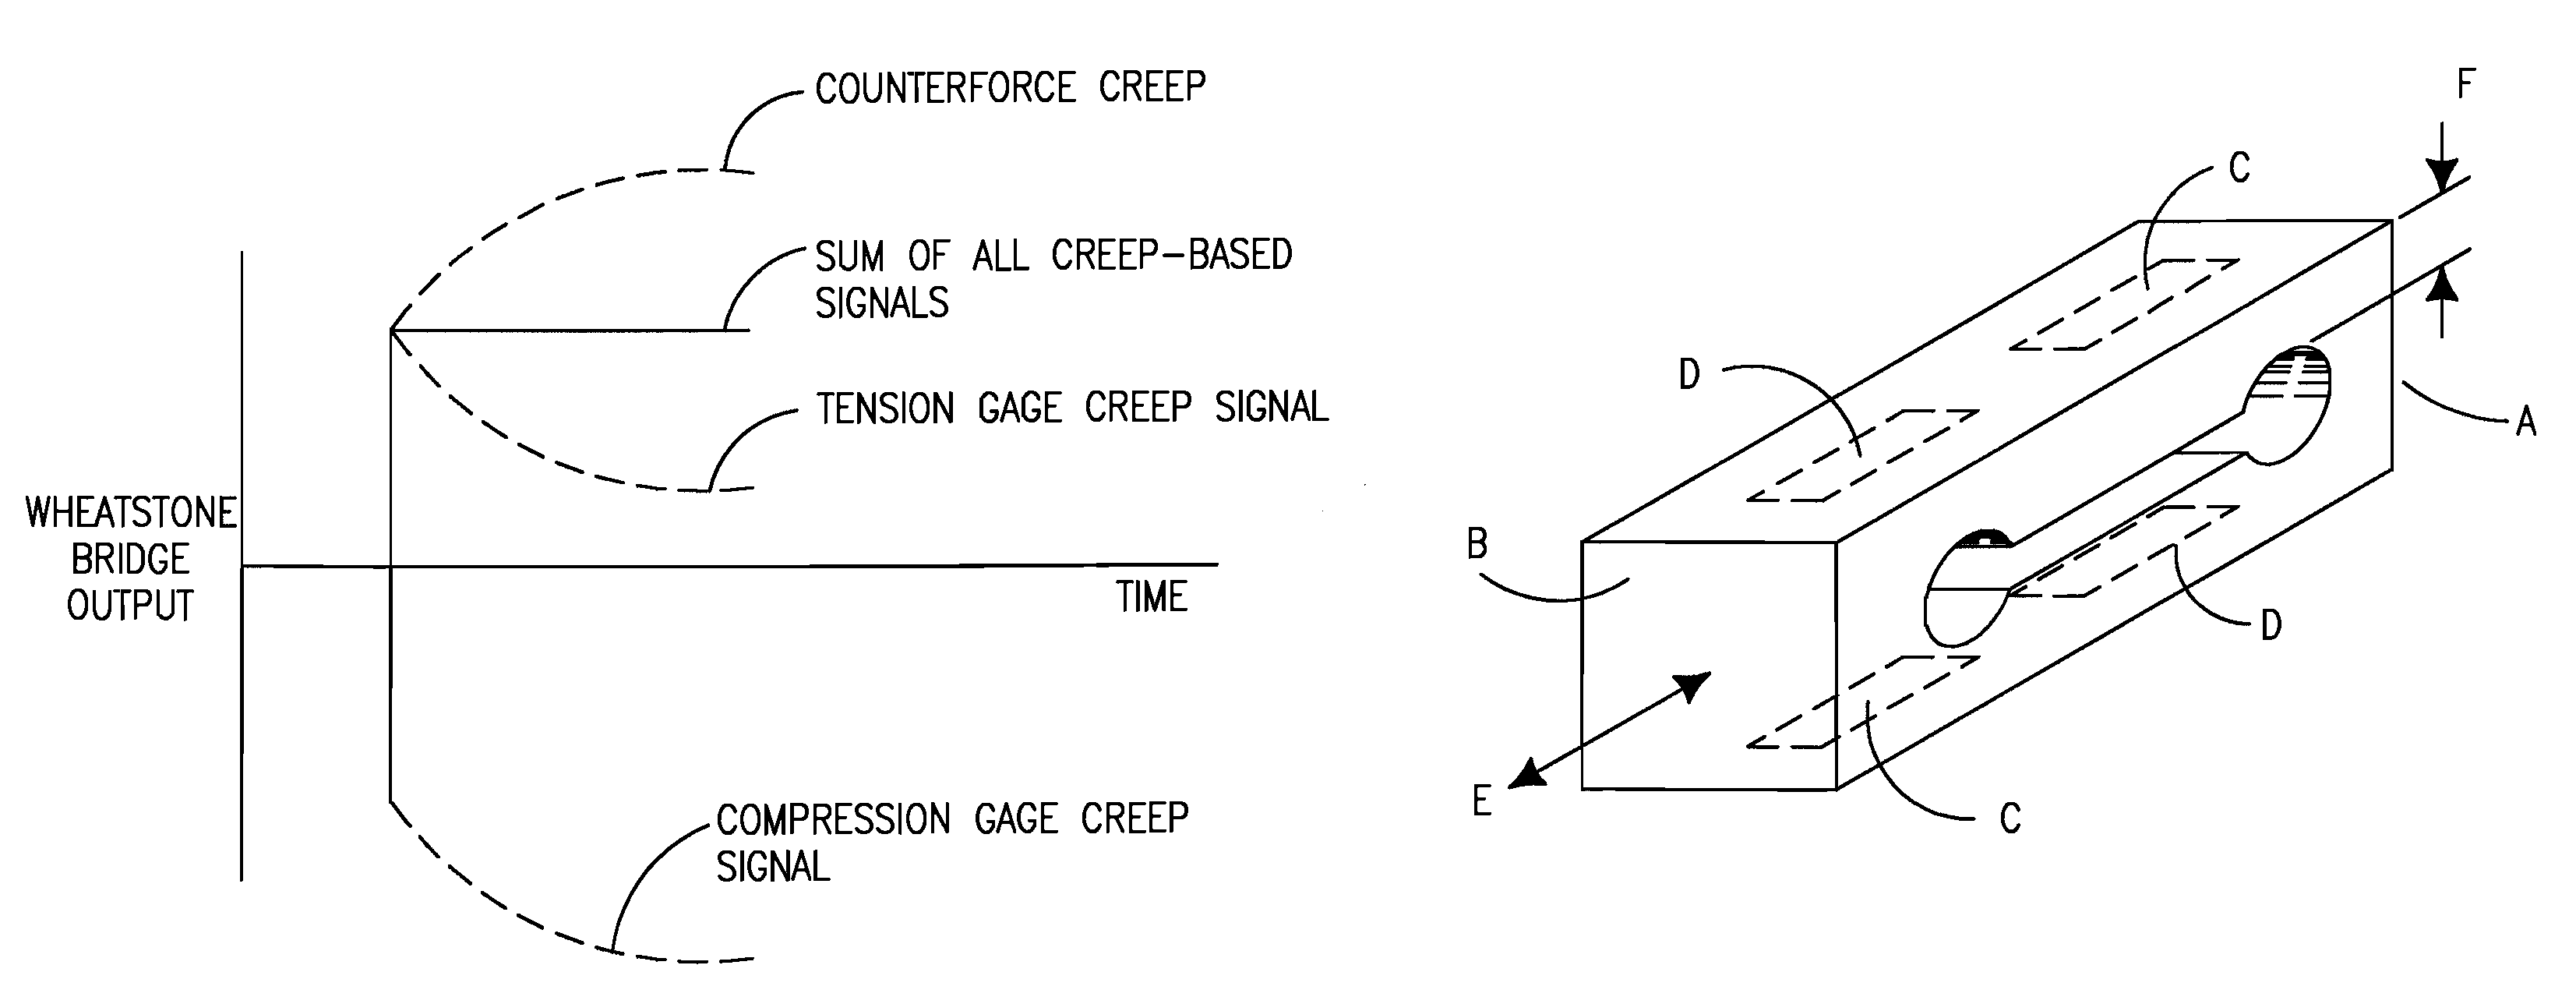 Circuit compensation in strain gage based transducers